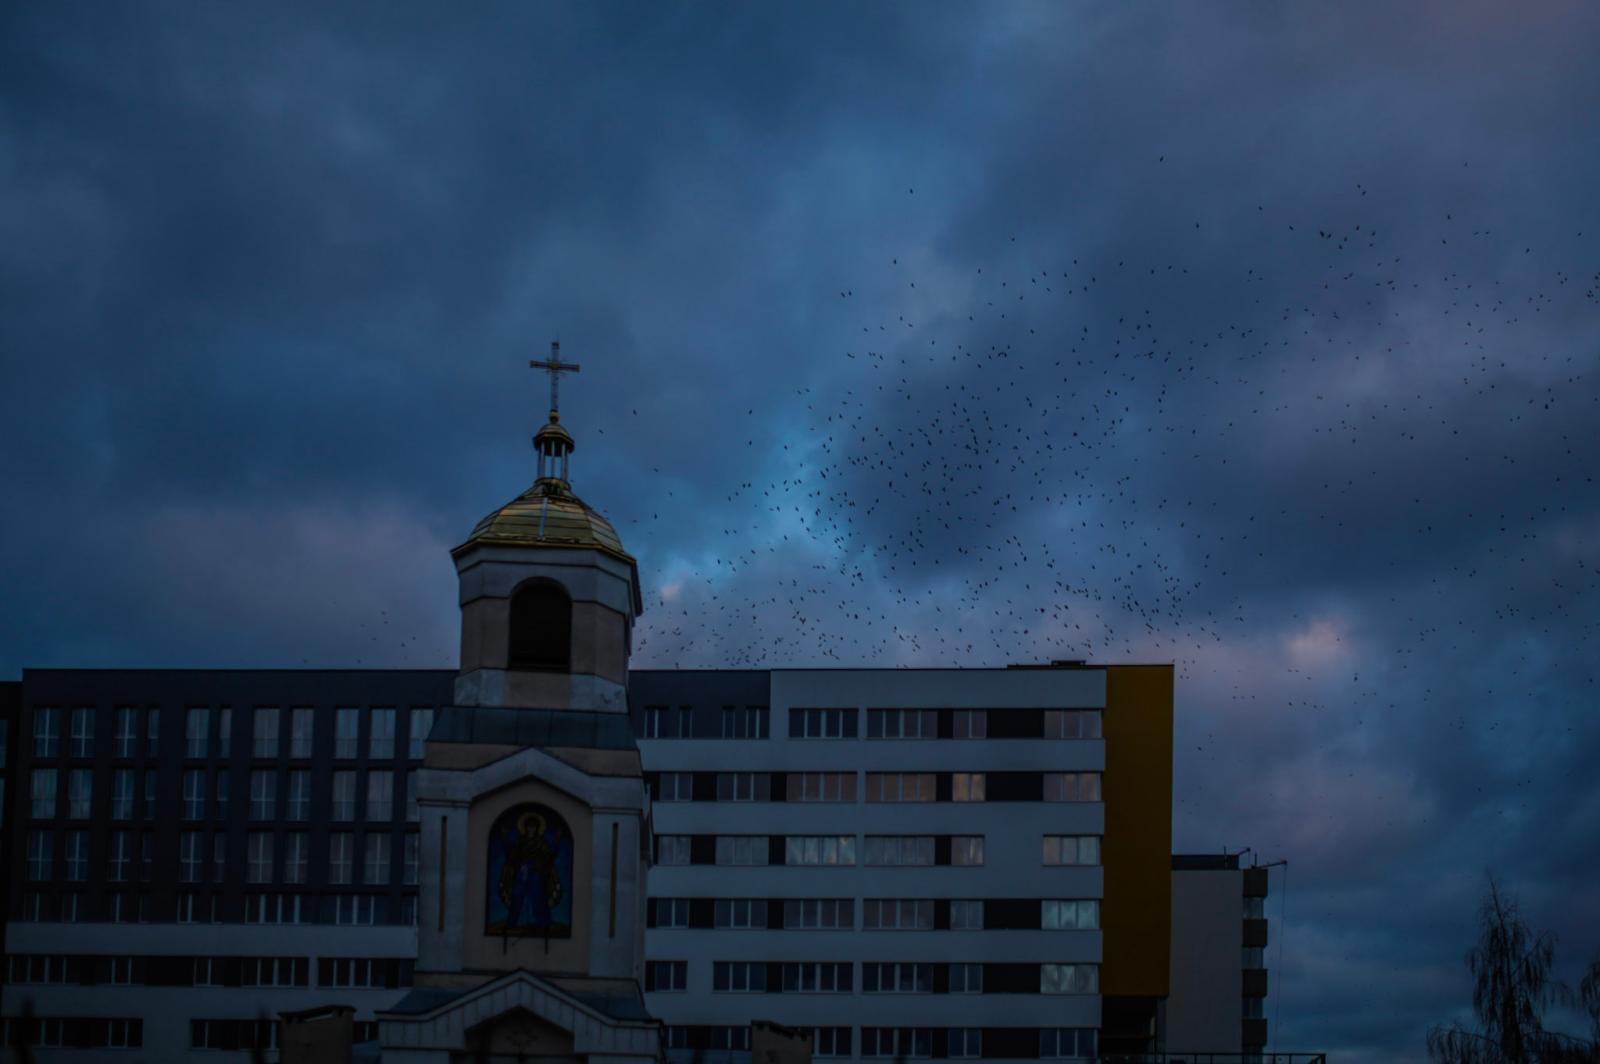 Crows fly in the skies of Lviv,.... Photo by Gian Marco Benedetto